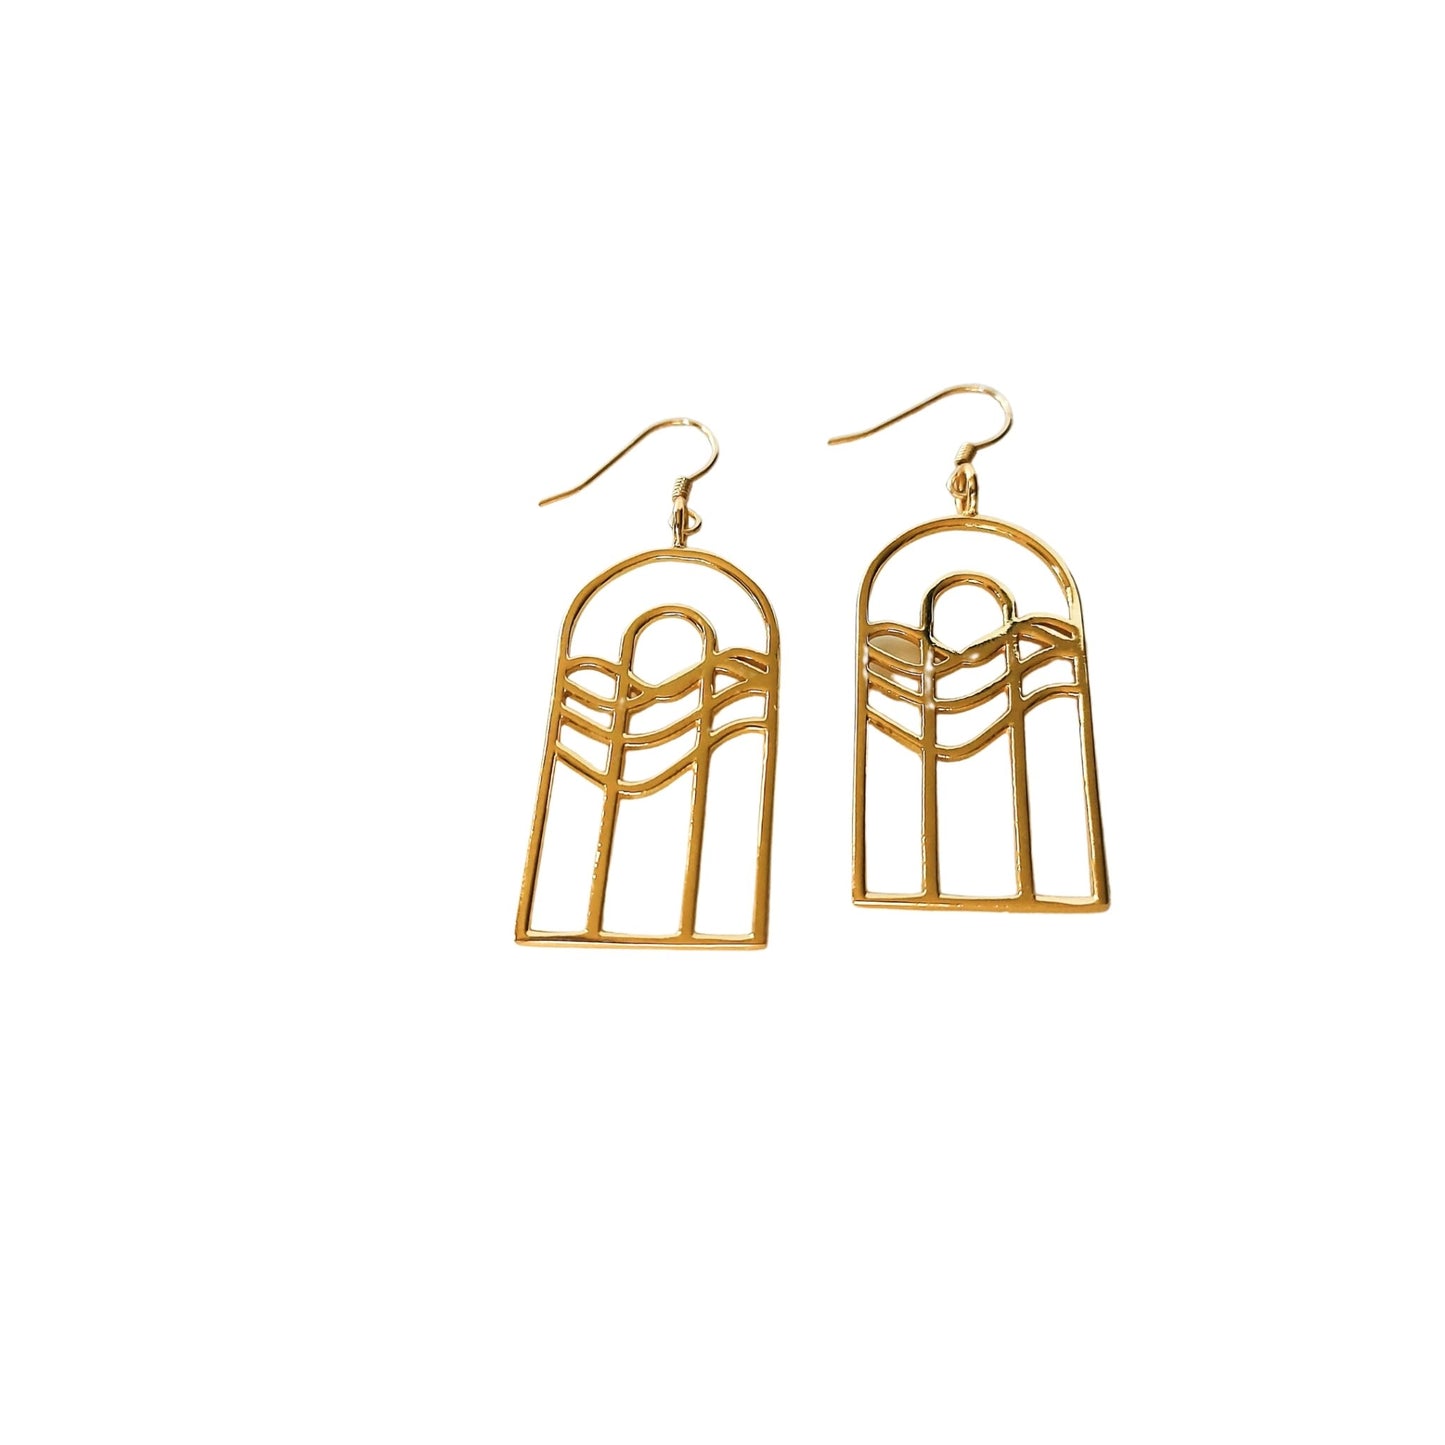 Rose gold plated silver earrings with rainbows and water flowing, these earrings also resemble cathedral windows